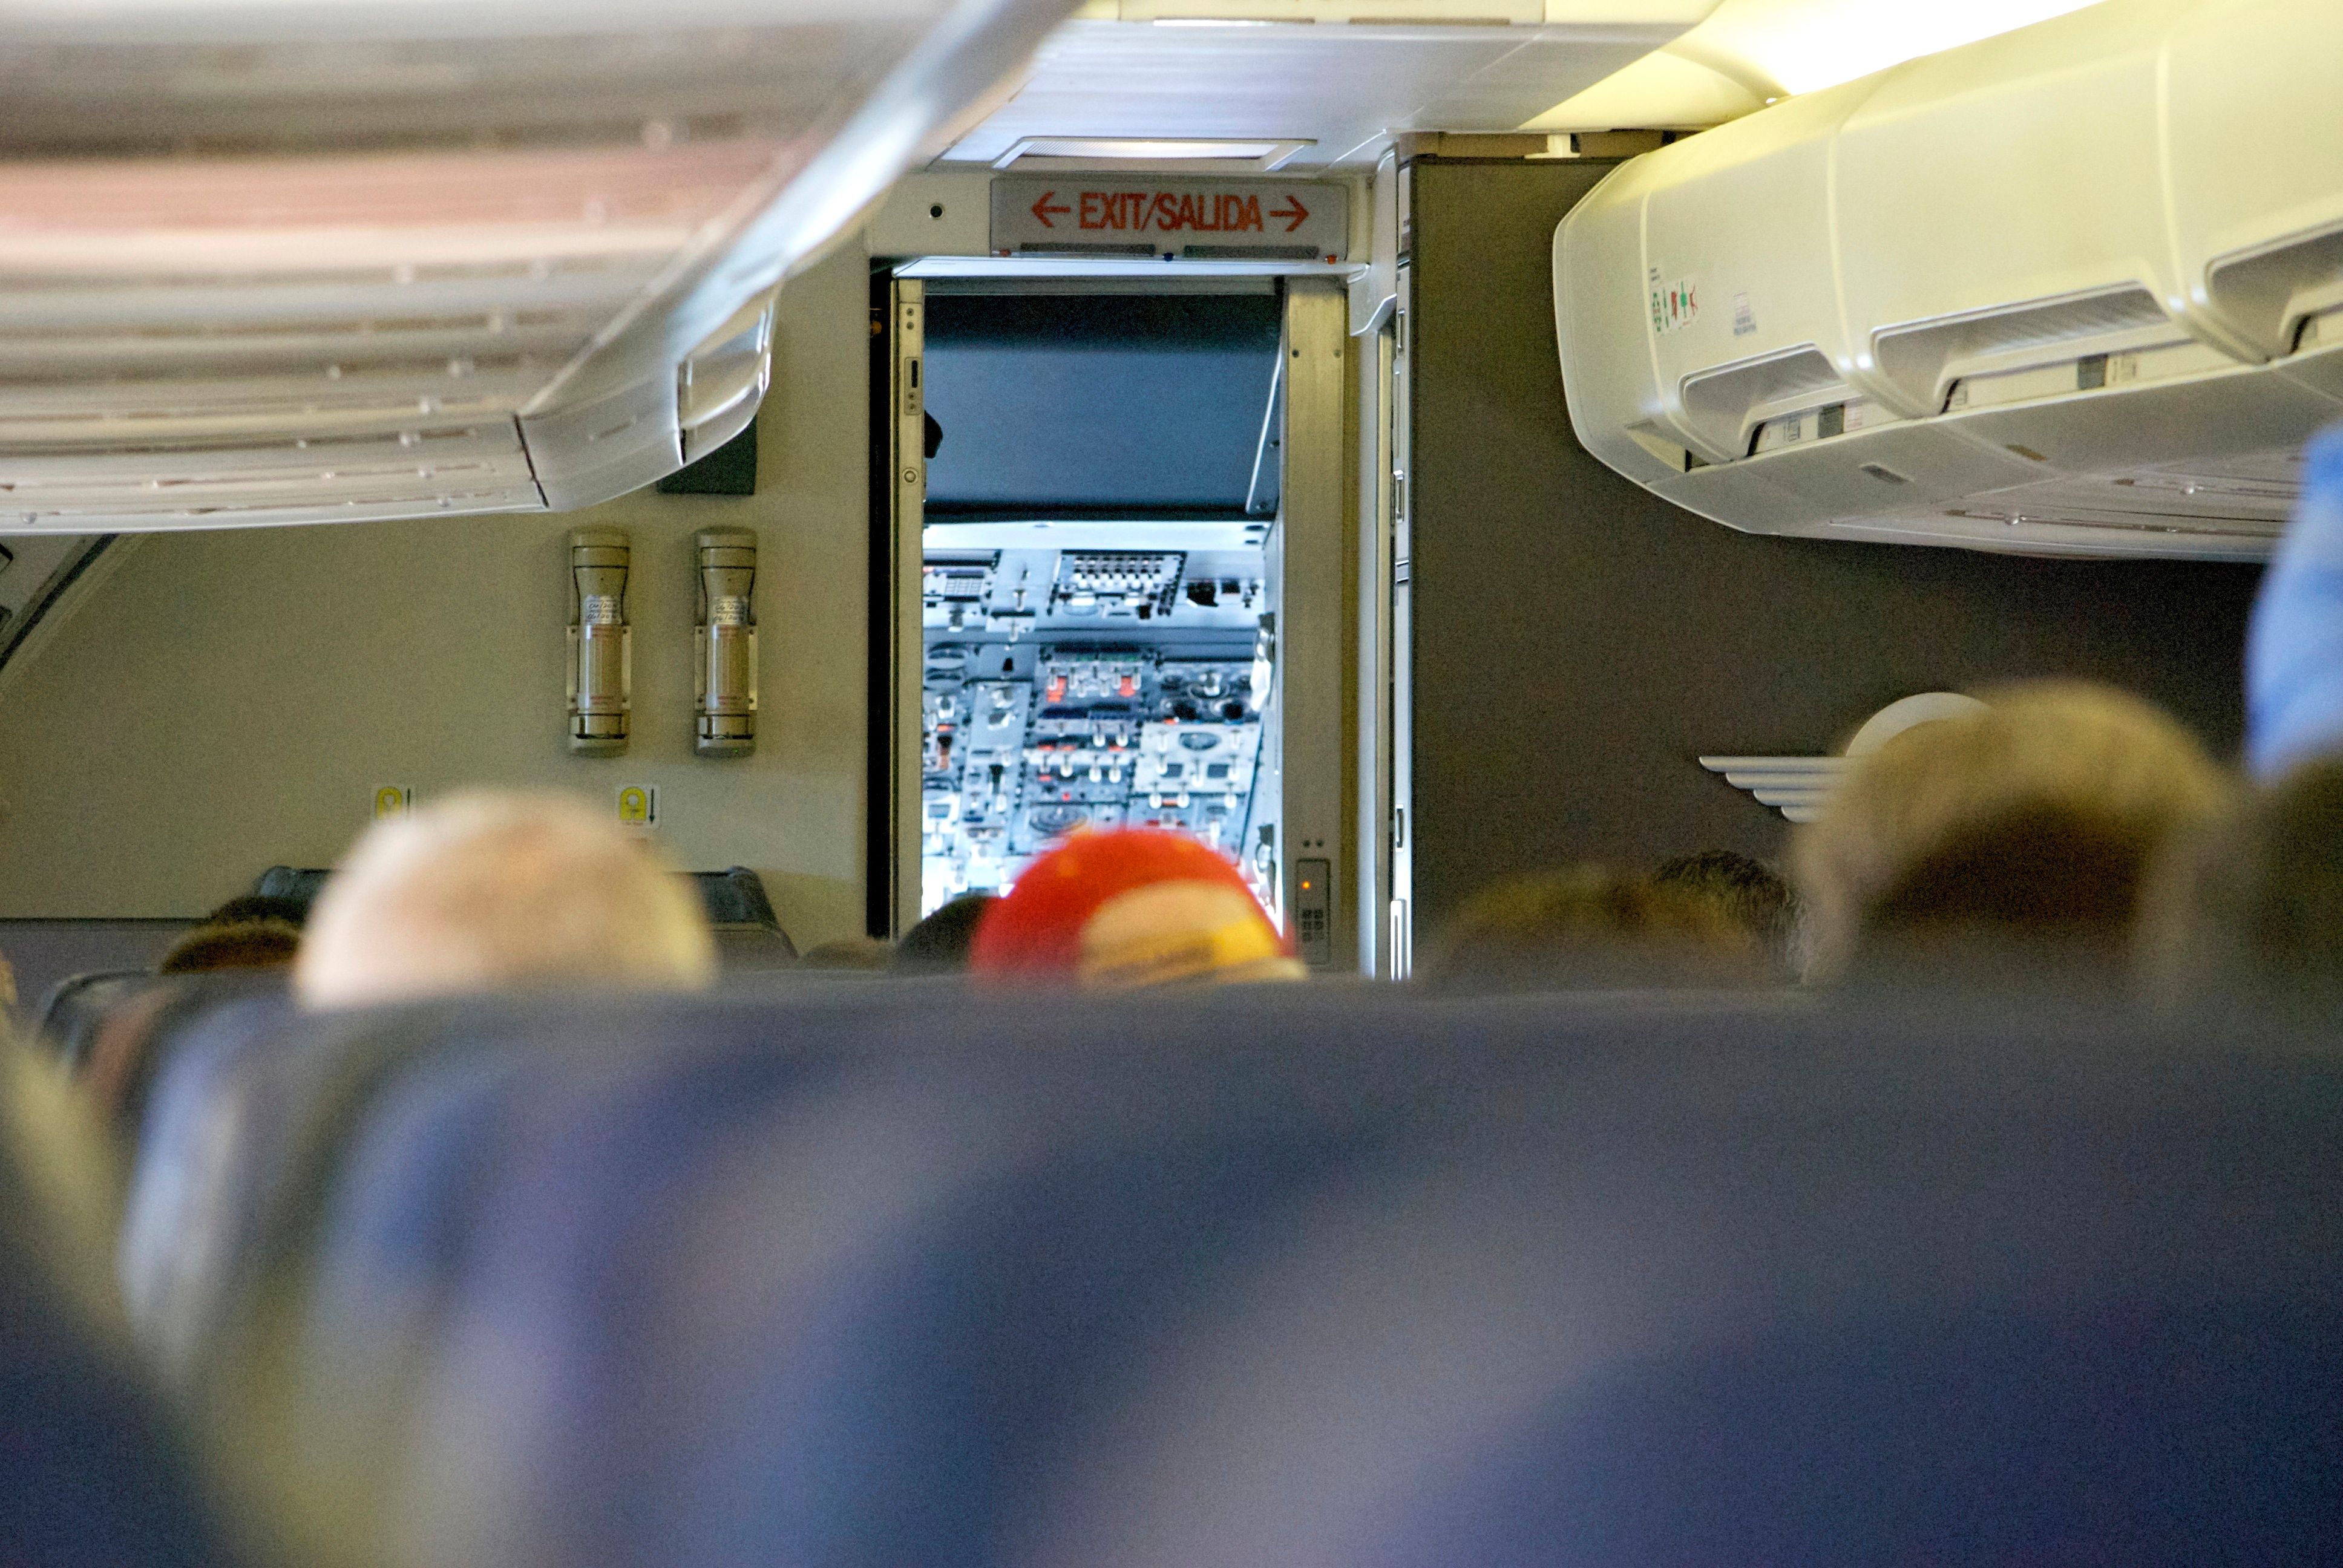 Inside an airliner cabin, looking at the open cockpit door.